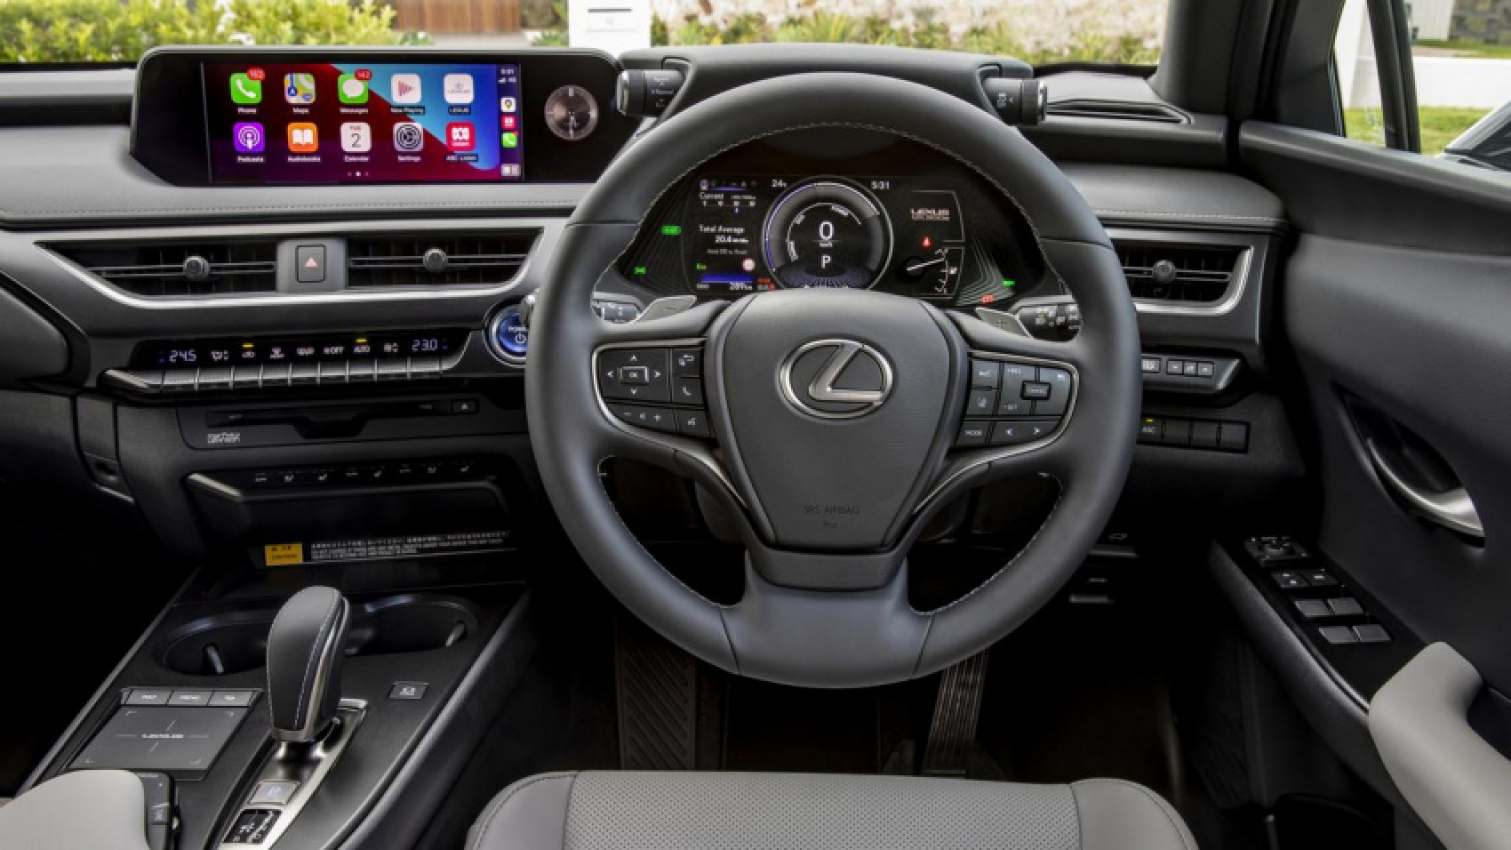 autos, cars, lexus, news, android, luxury, motoring, technology, android, 2022 lexus ux300e review: ownership perks are top-notch